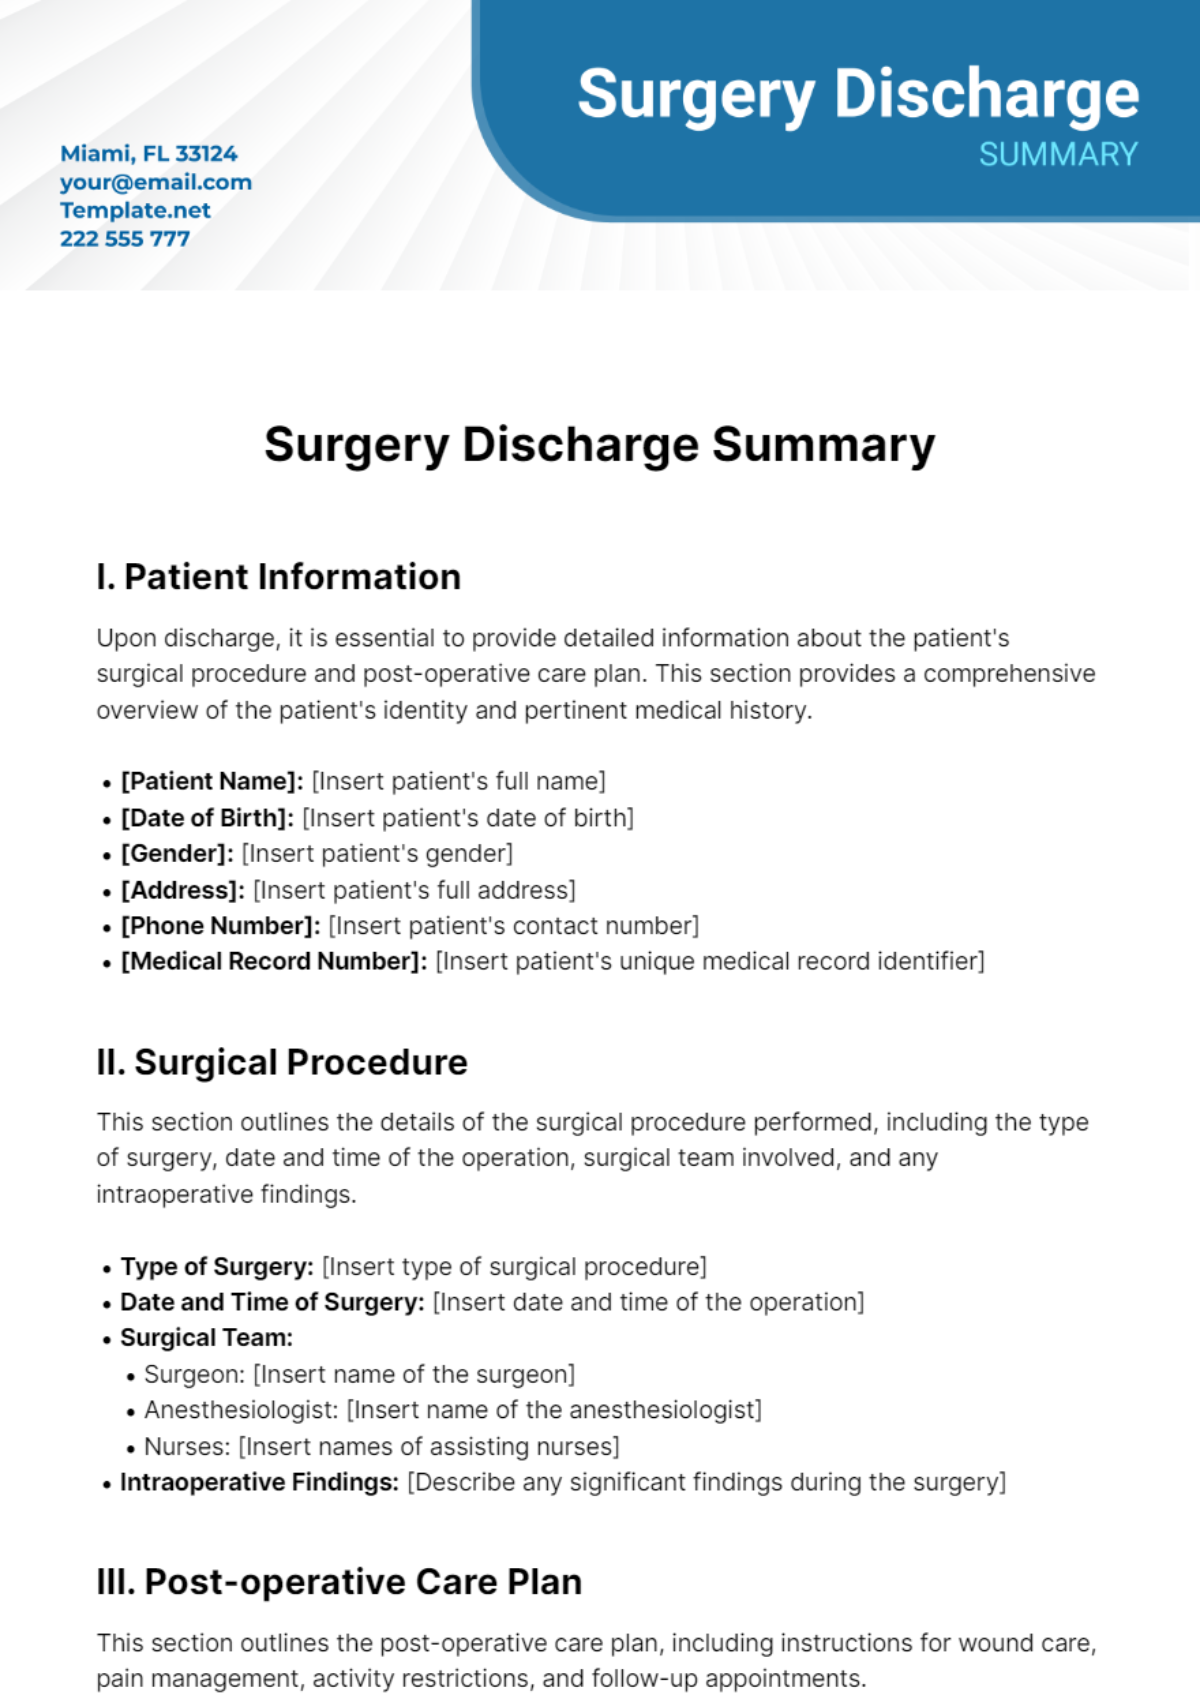 Surgery Discharge Summary Template